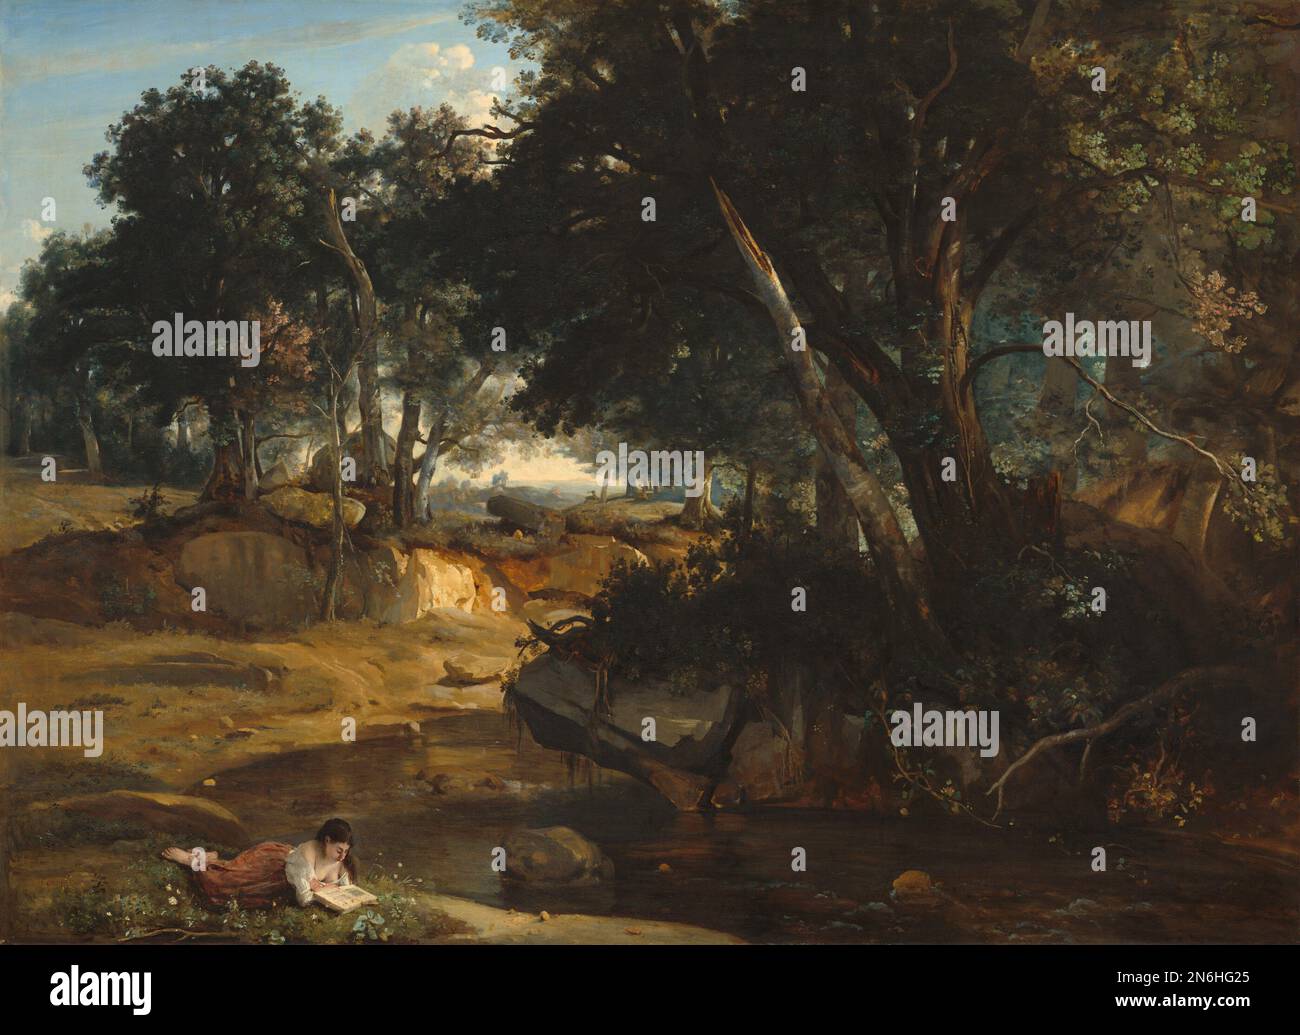 Jean-Baptiste-Camille Corot Forest of Fontainebleau 1834 Stock Photo